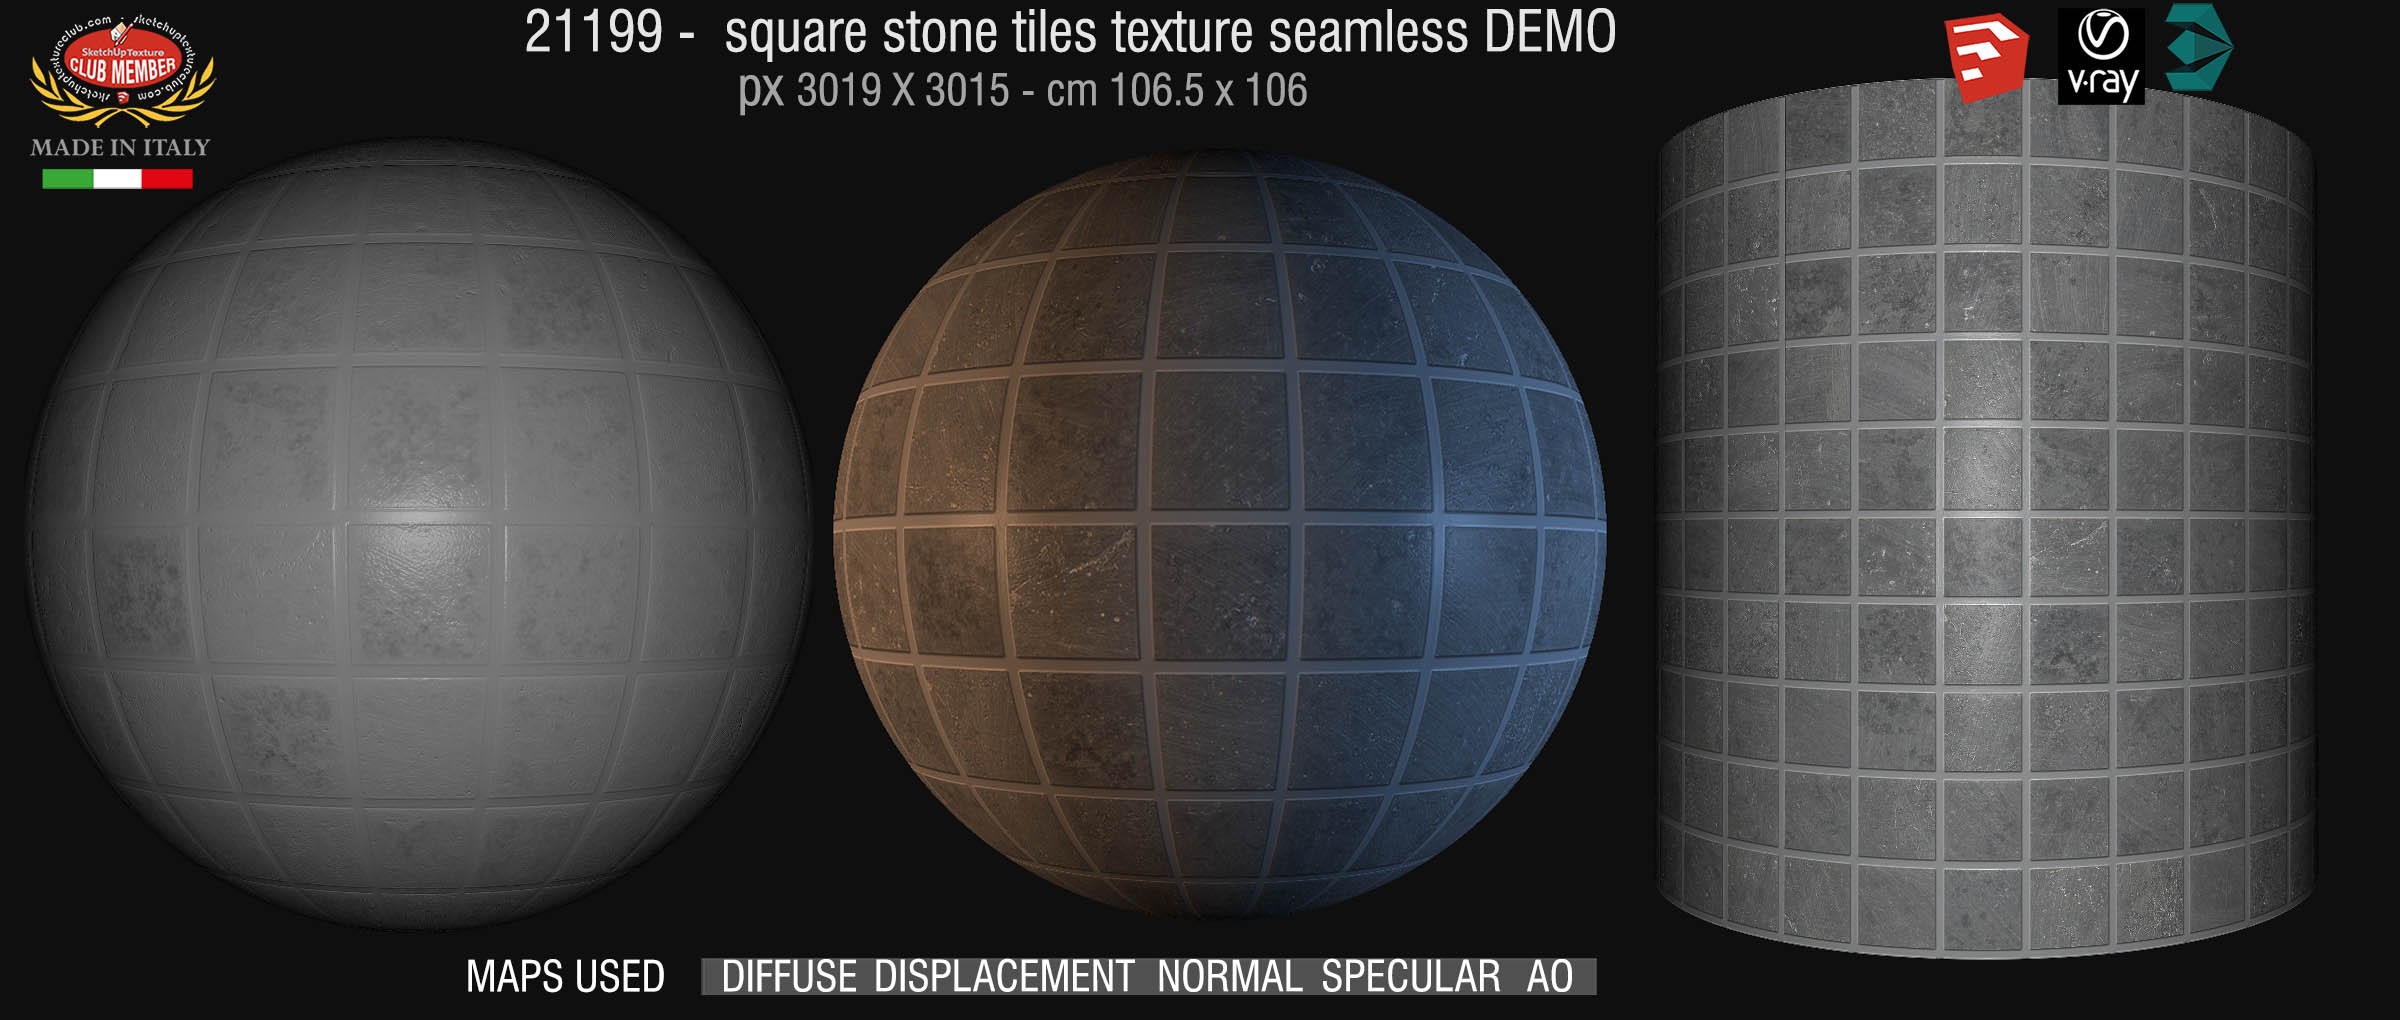 21199 CLICK TO ENLARGE Square stone tile texture + maps DEMO